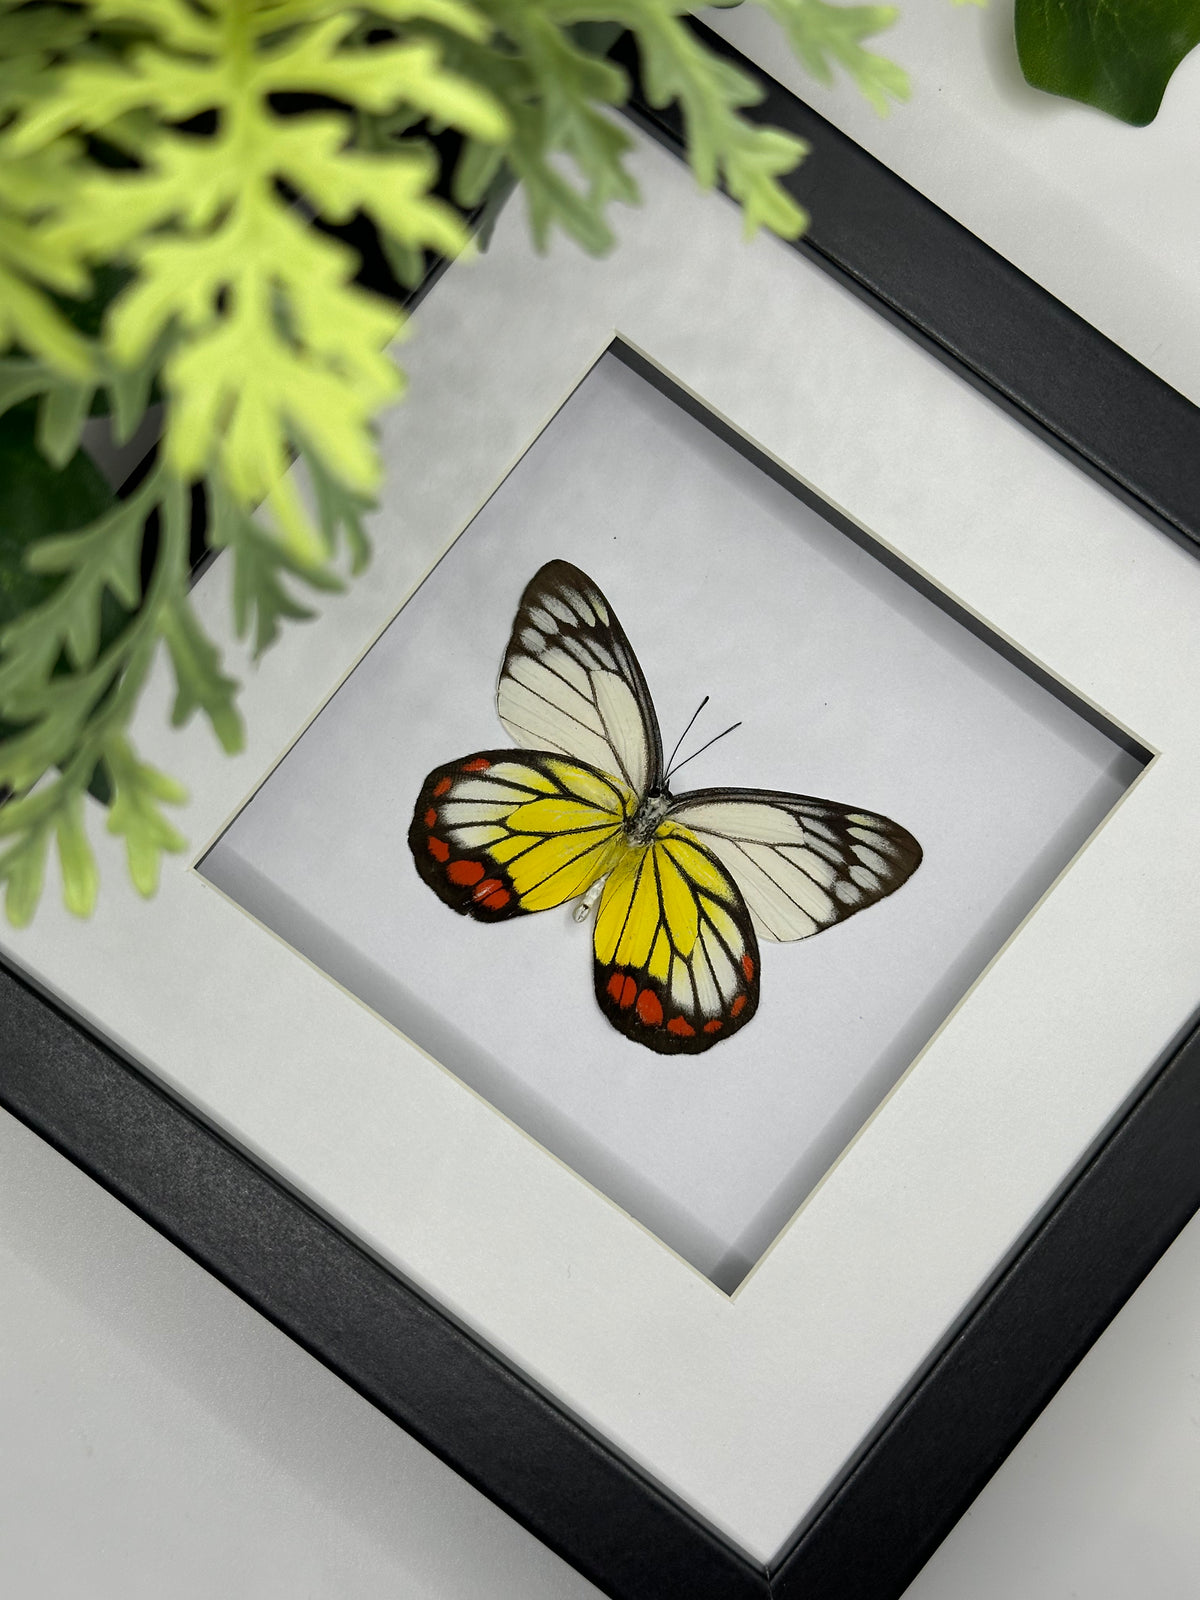 Painted Jezebel Butterfly / Delias Hyparete Luzonensis in a frame